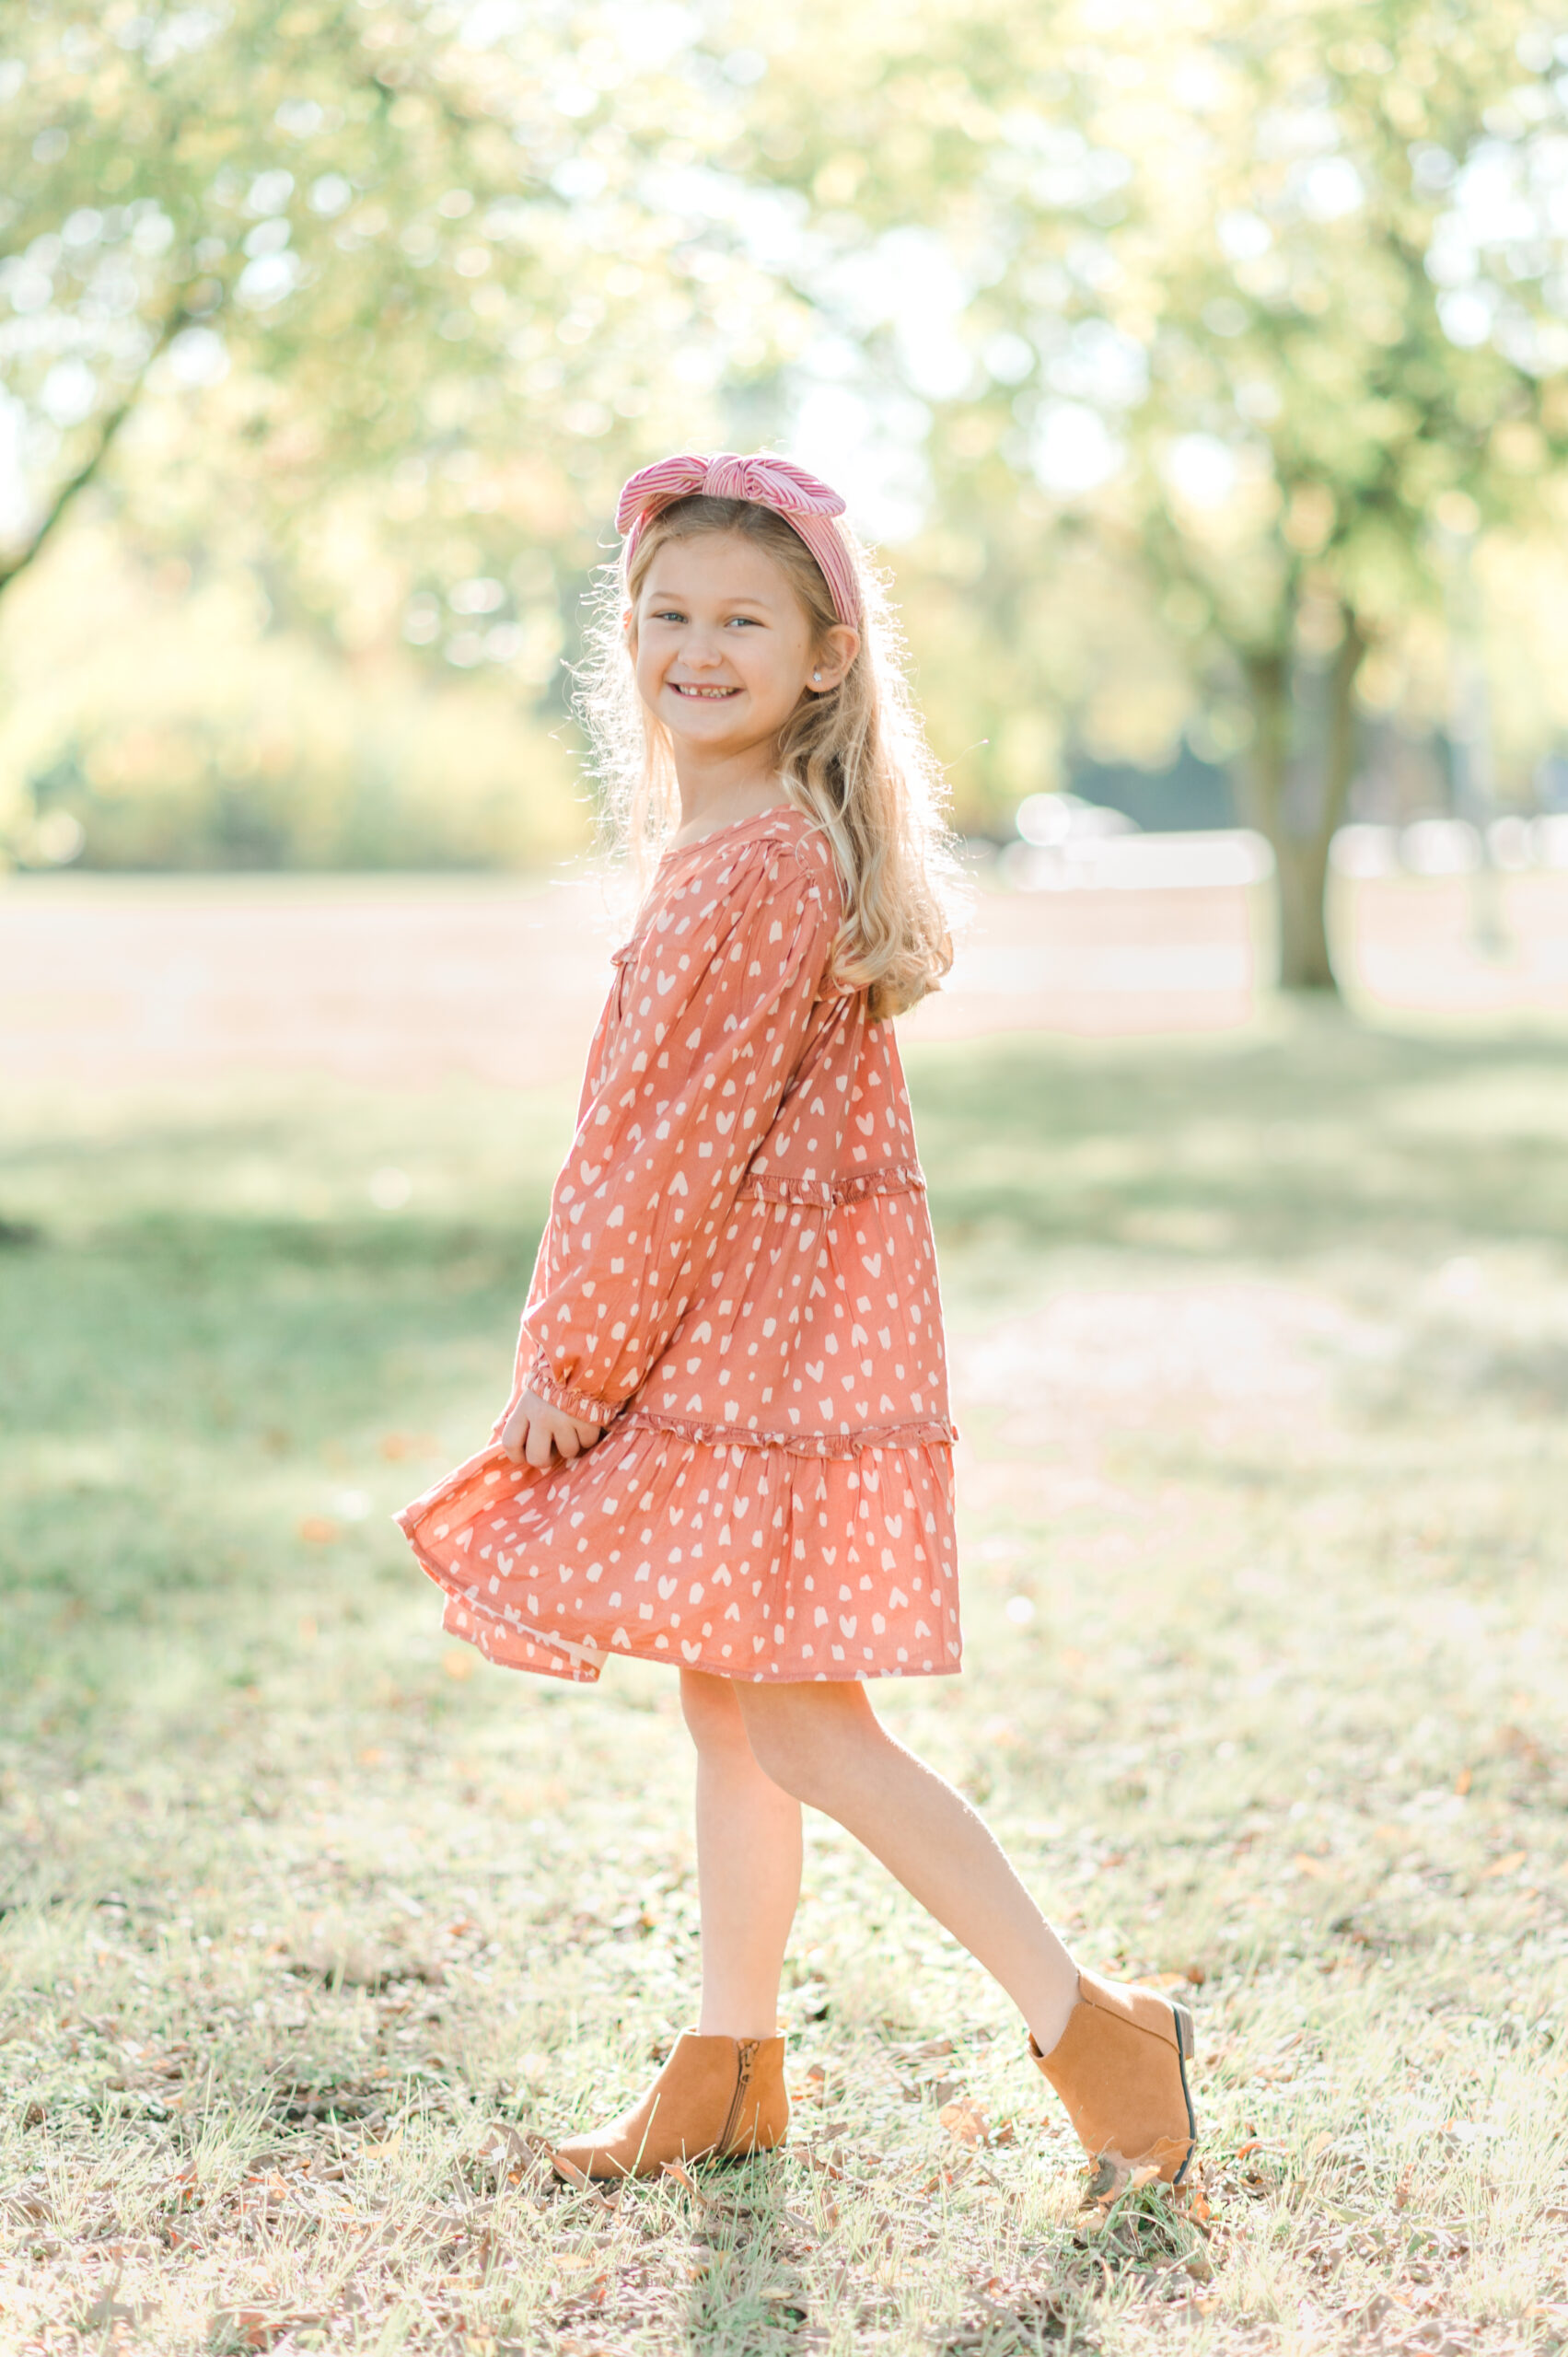 Girl in a coral dress with a heart pattern twirling in a park.